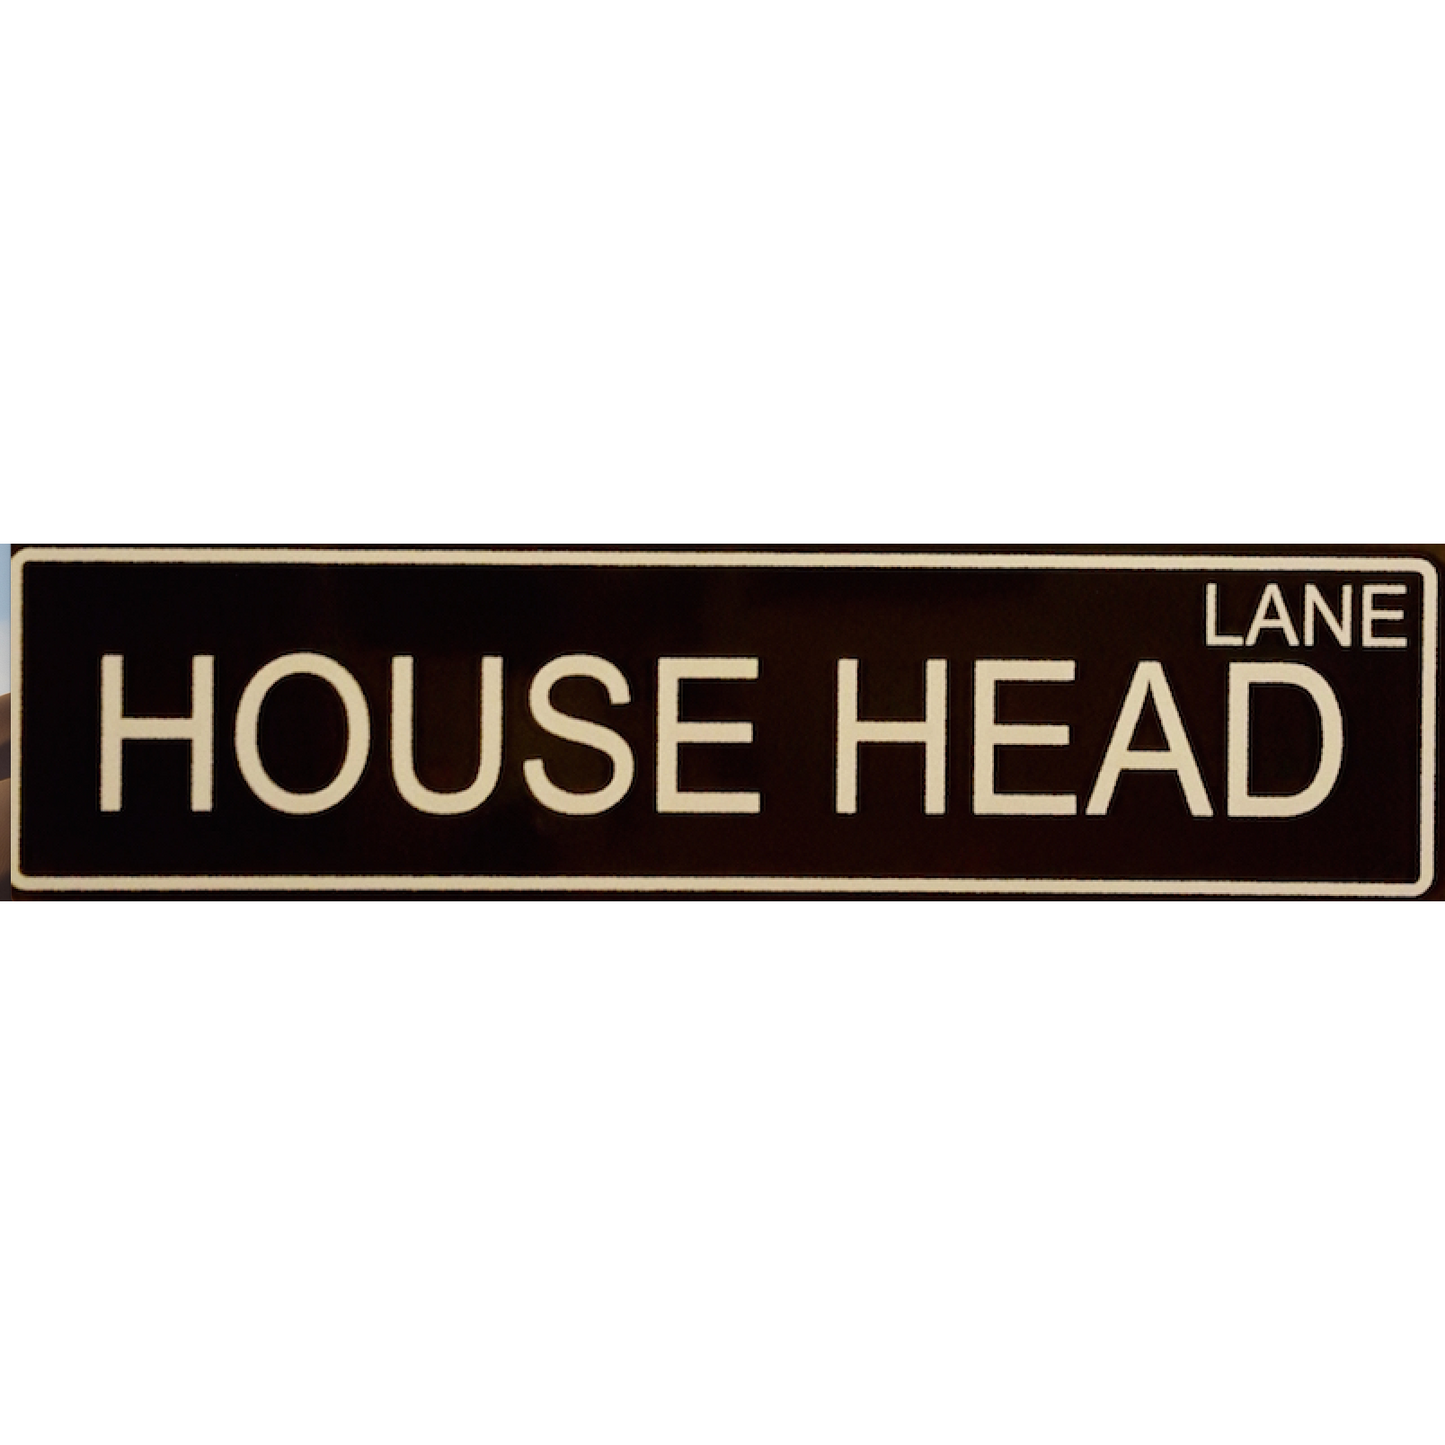 HOUSE MUSIC WAY & HOUSE HEAD LANE STREET SIGN with FREE SHIPPING! Only 10 made for each design.